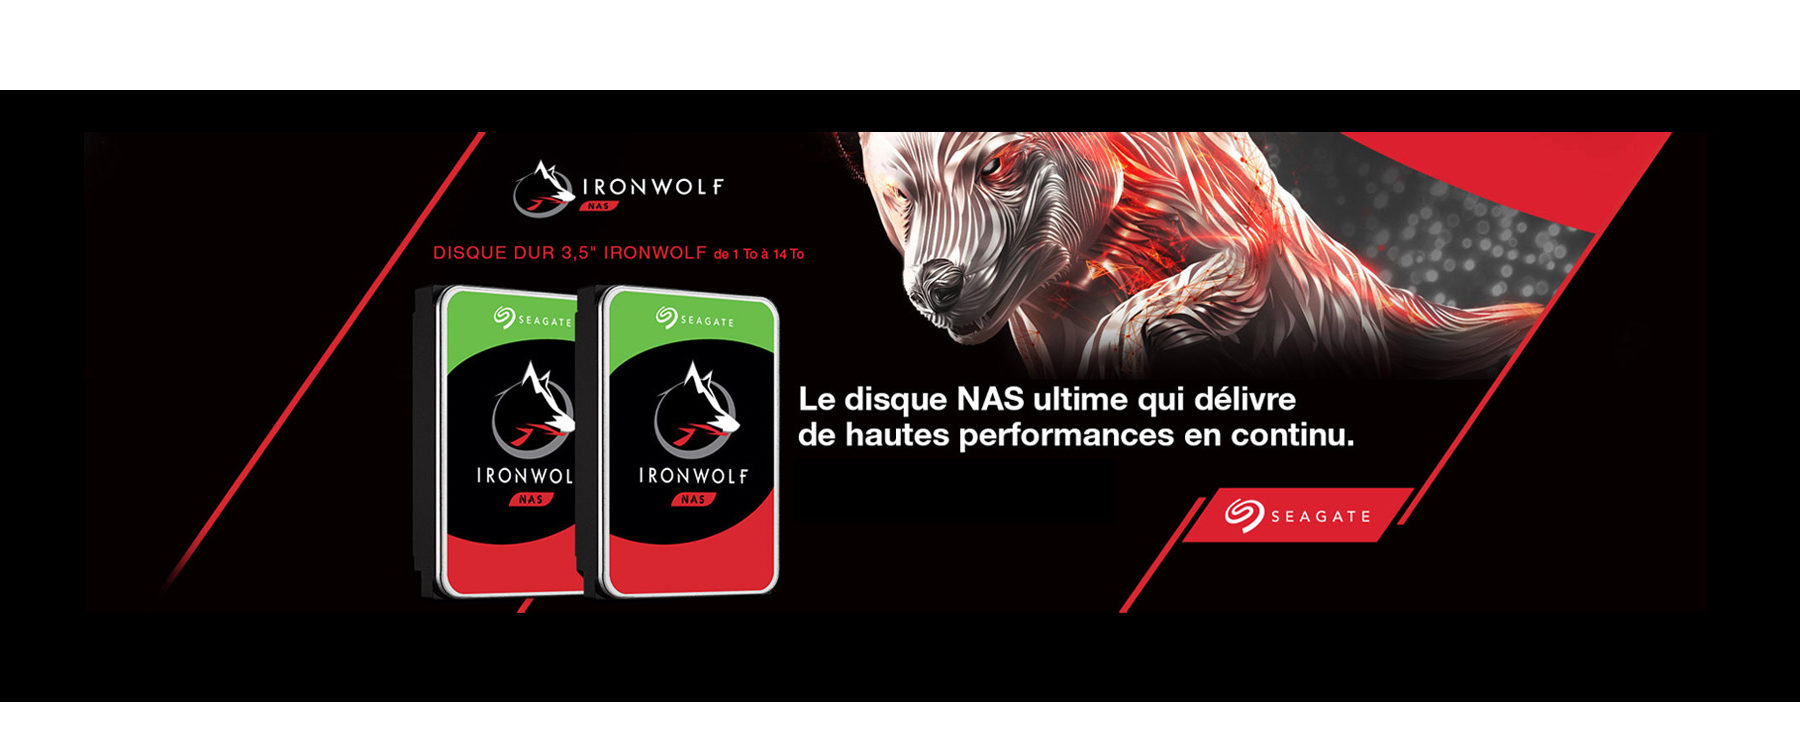 Seagate IronWolf 1 To - Disque dur interne - LDLC